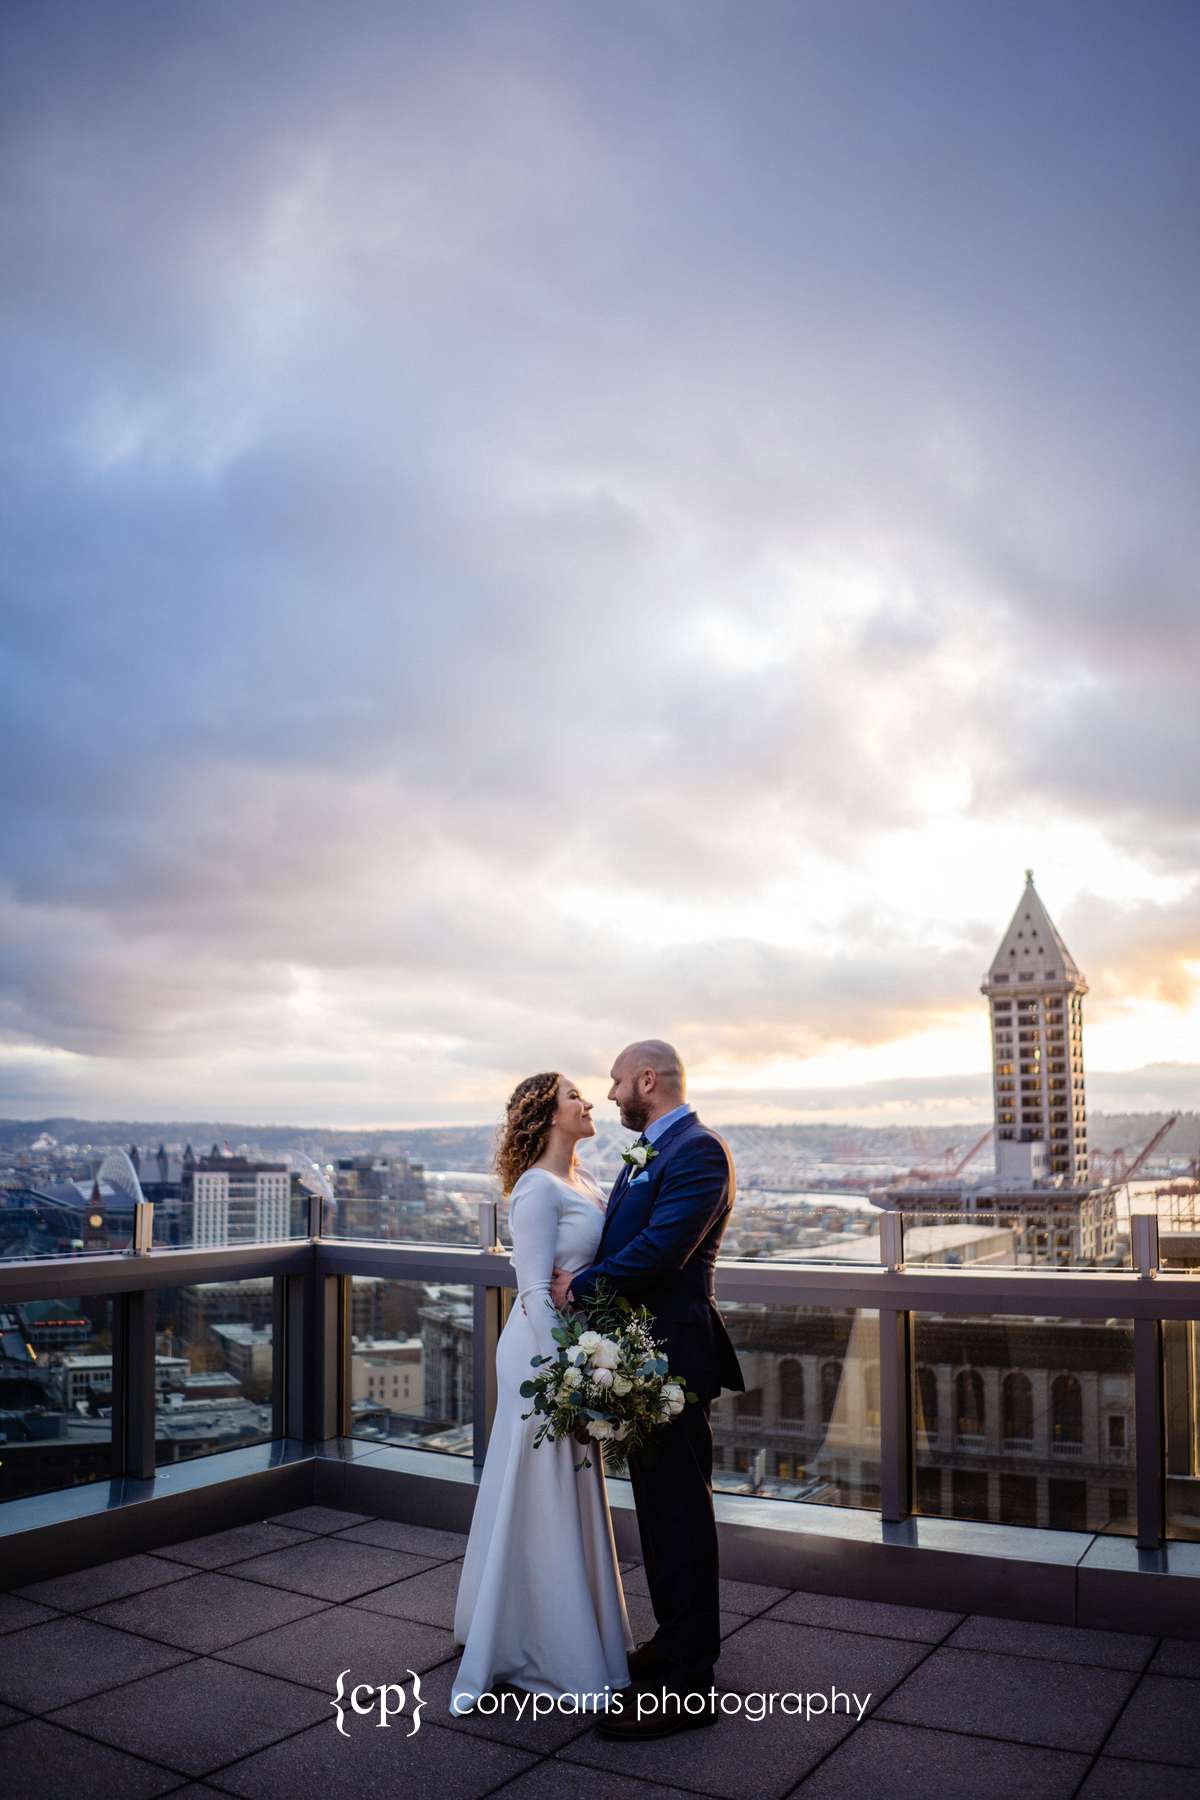 108-Seattle-Elope-Courthouse.jpg